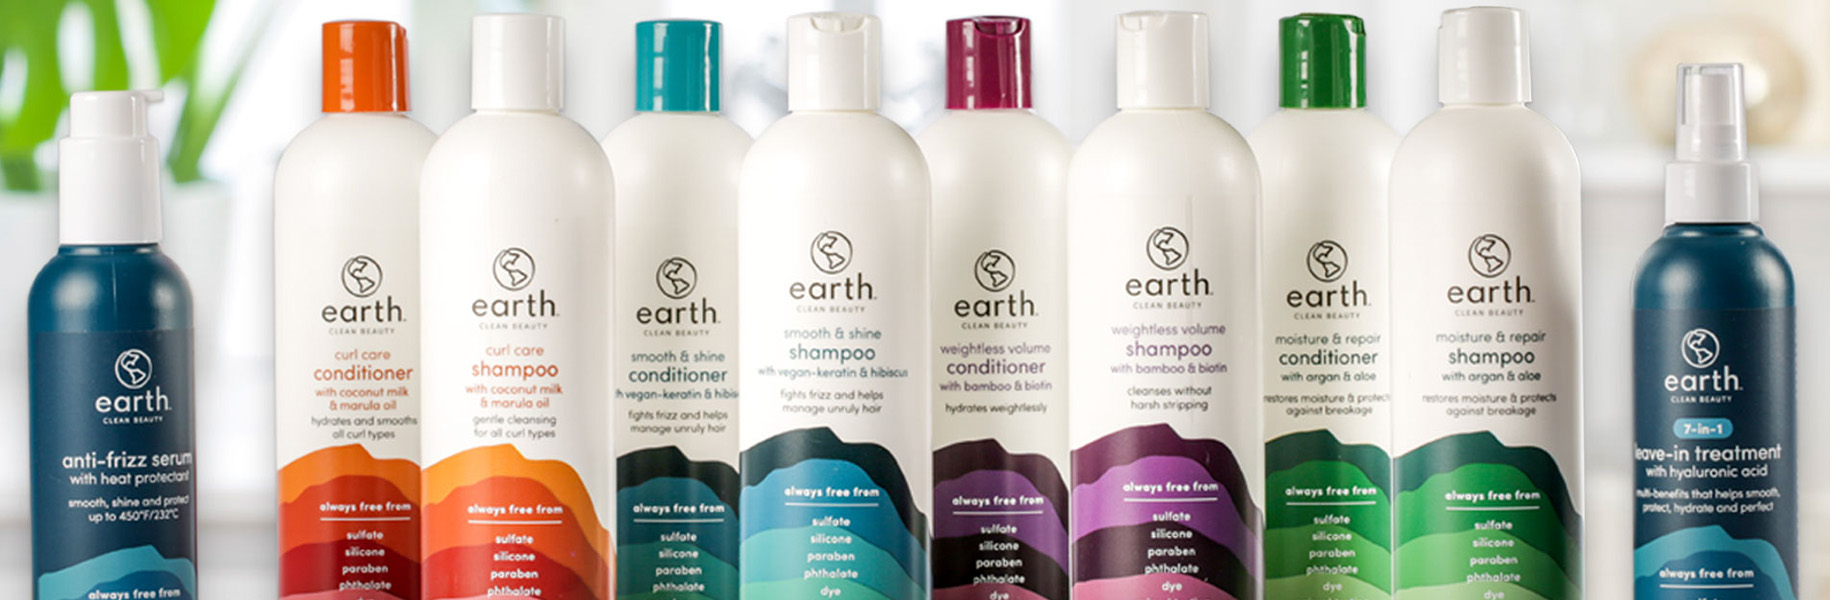 earth products 